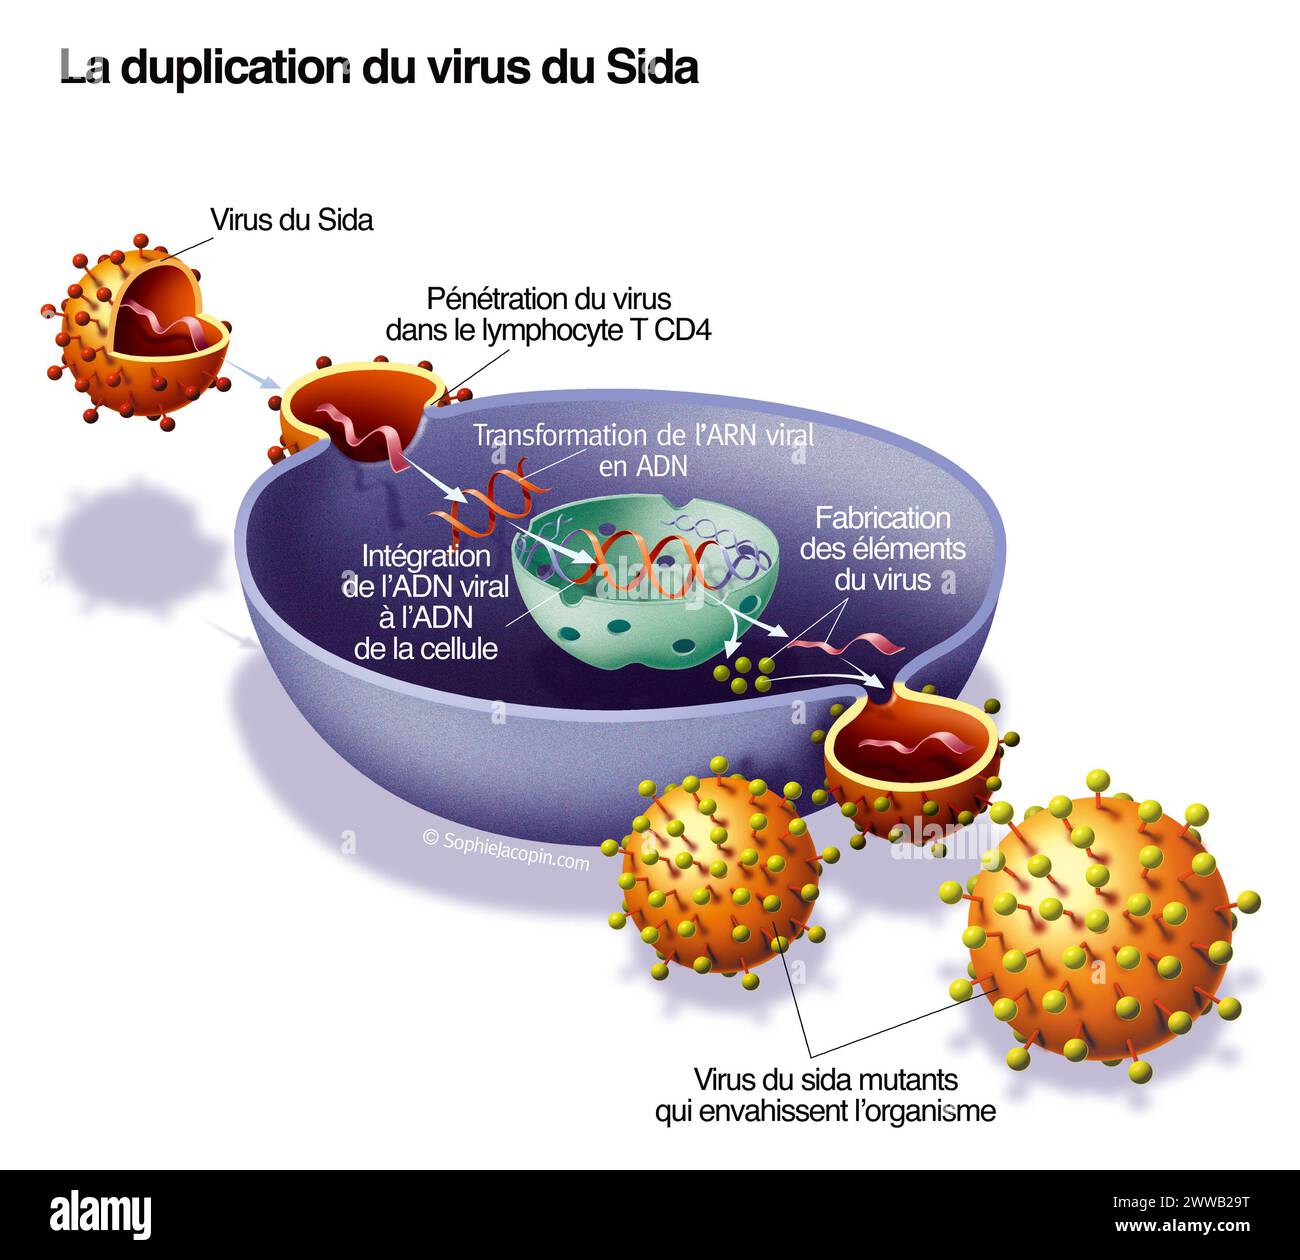 Duplication of the AIDS virus. Representation of the penetration and duplication of the AIDS virus thanks to a CD4 host cell. Stock Photo